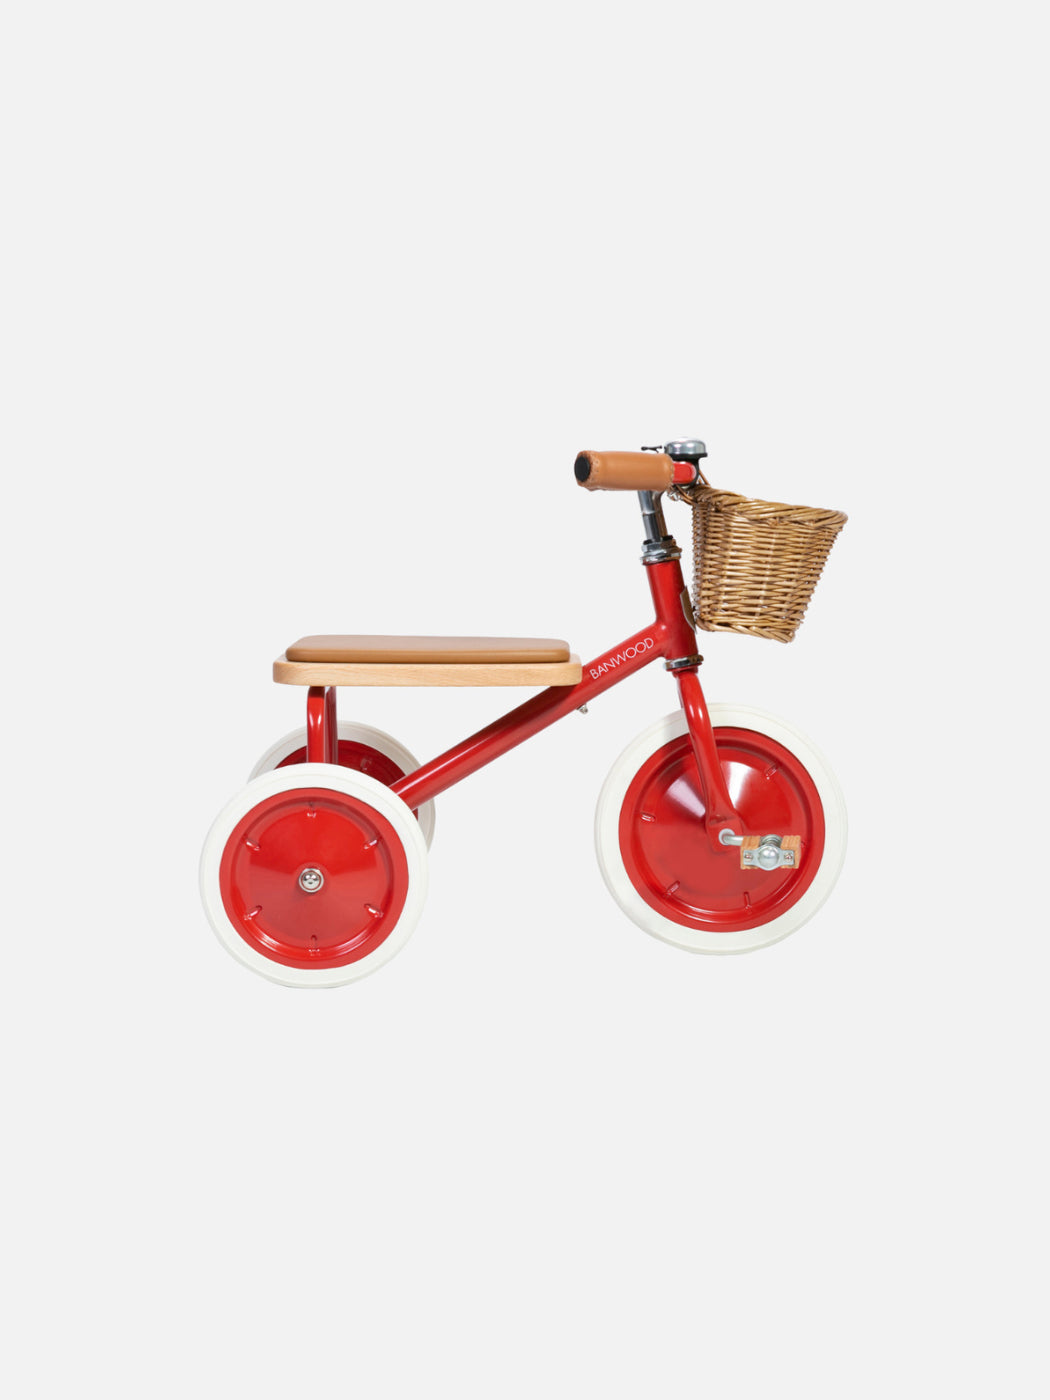 Red metal trike with a wicker basket and wooden seat.